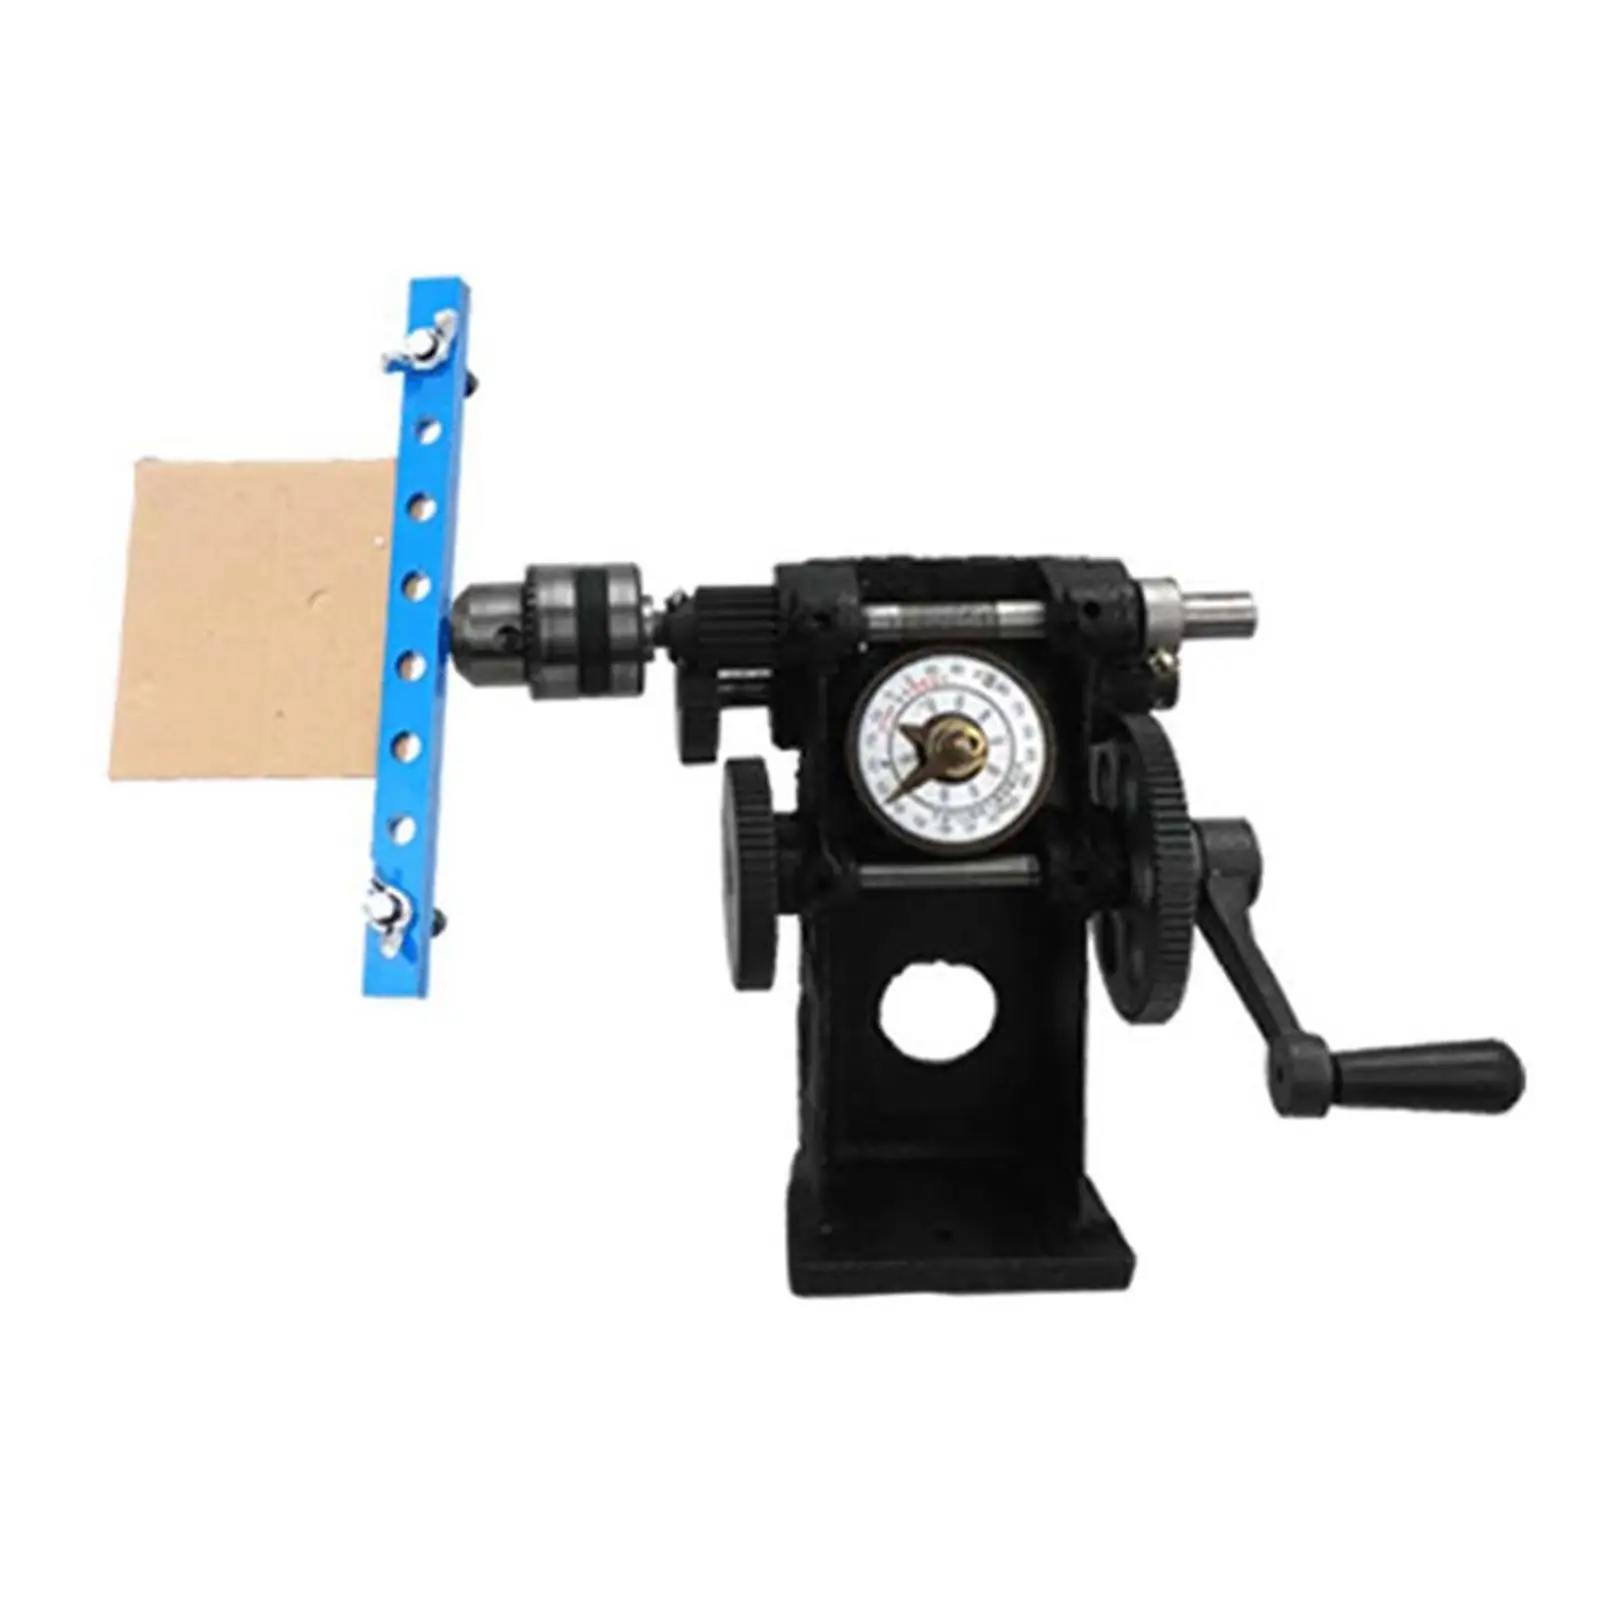 Paper Winding Machine 5mm~200mm Clamping Width Manually Winding Machine Heavy Duty Hand Tool Convenient for Crafts Sewing